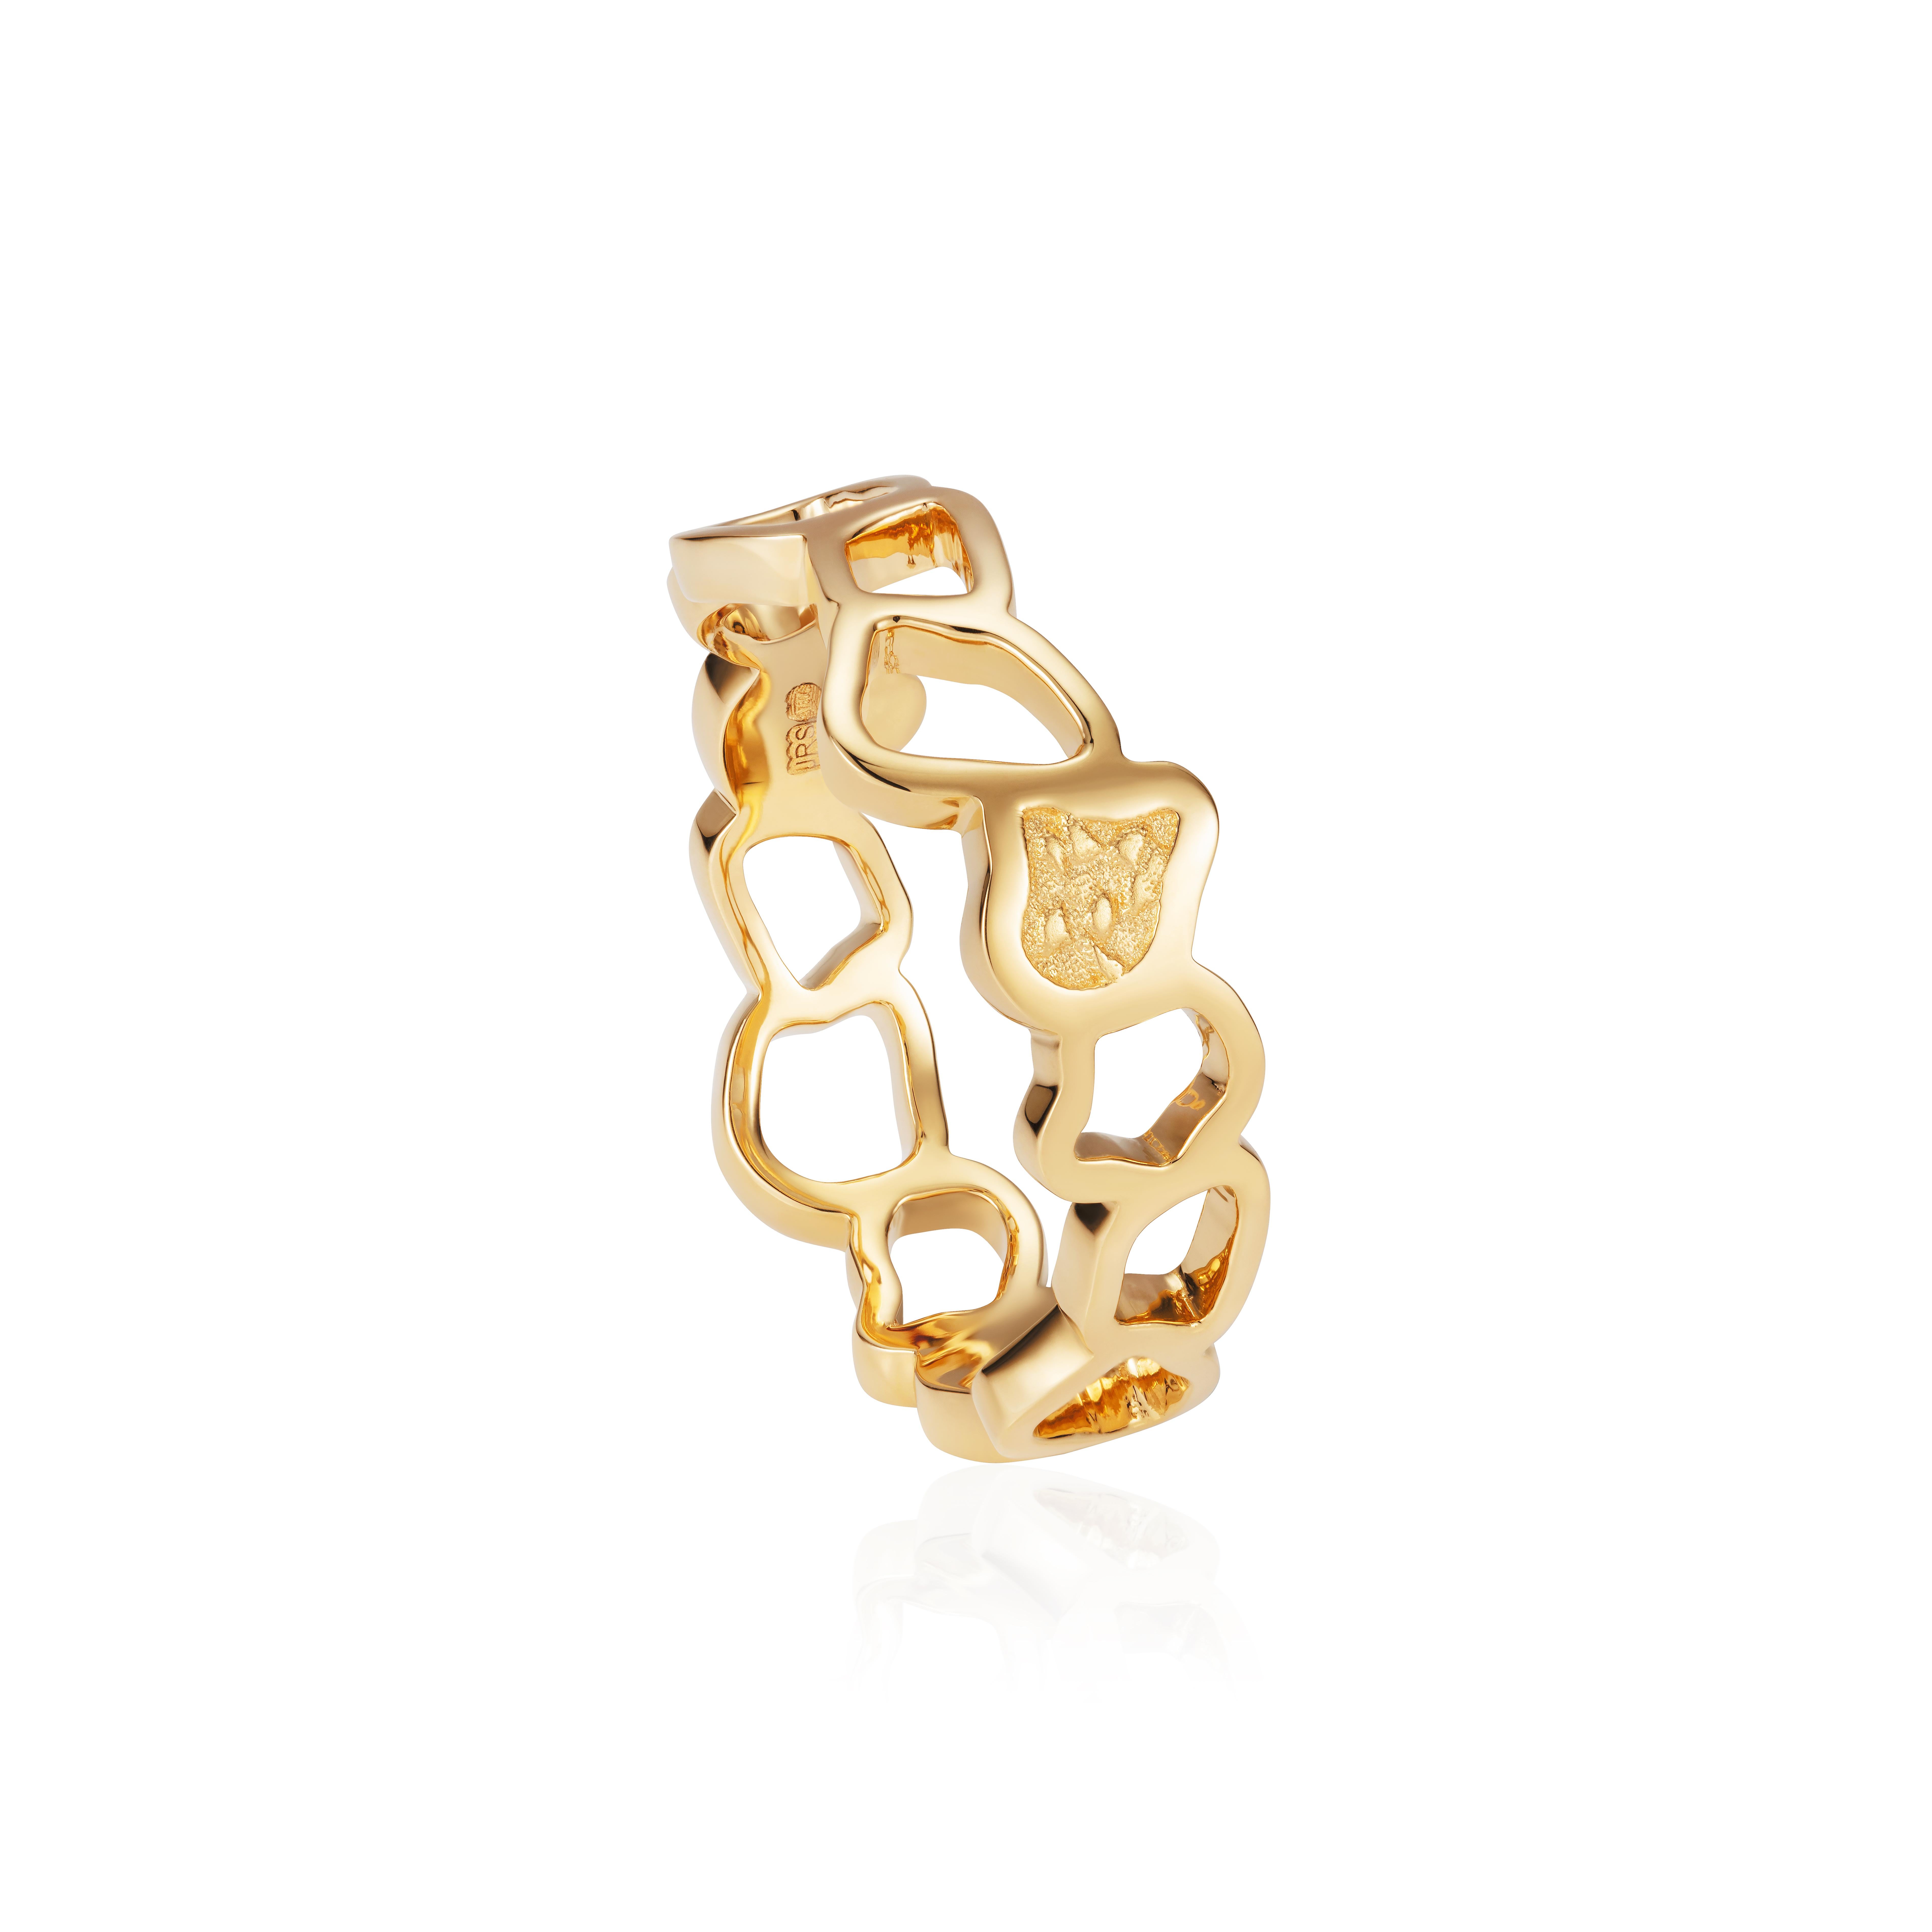 18 Karat Yellow Gold Band Ring 

This eye-catching yellow gold ring is perfect for everyday wear and will no doubt attract attention. Part of the Twiga collection, it features intricate detail resembling the giraffe's spots and has an average weight